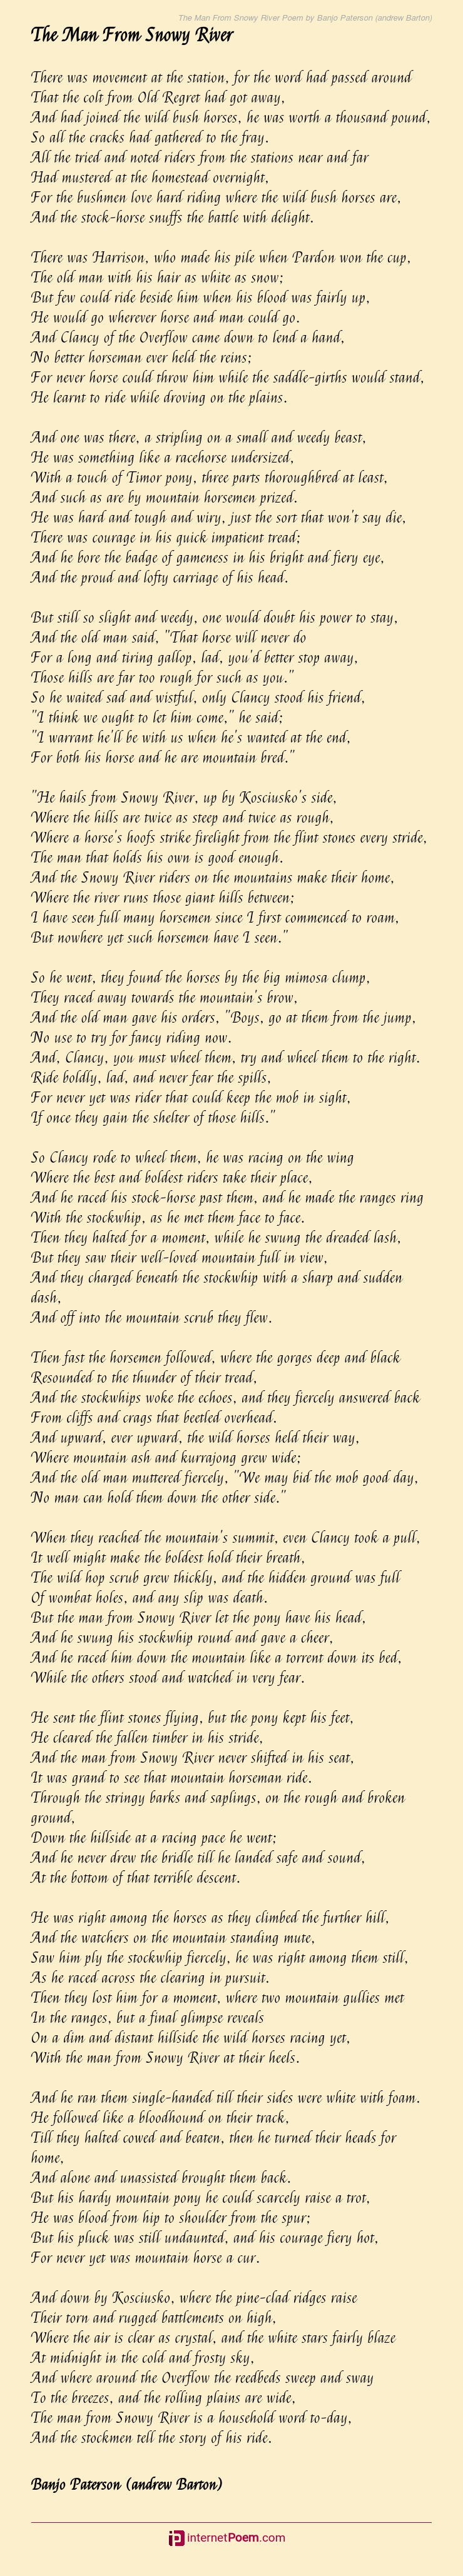 the-man-from-snowy-river-poem-by-banjo-paterson-andrew-barton.png